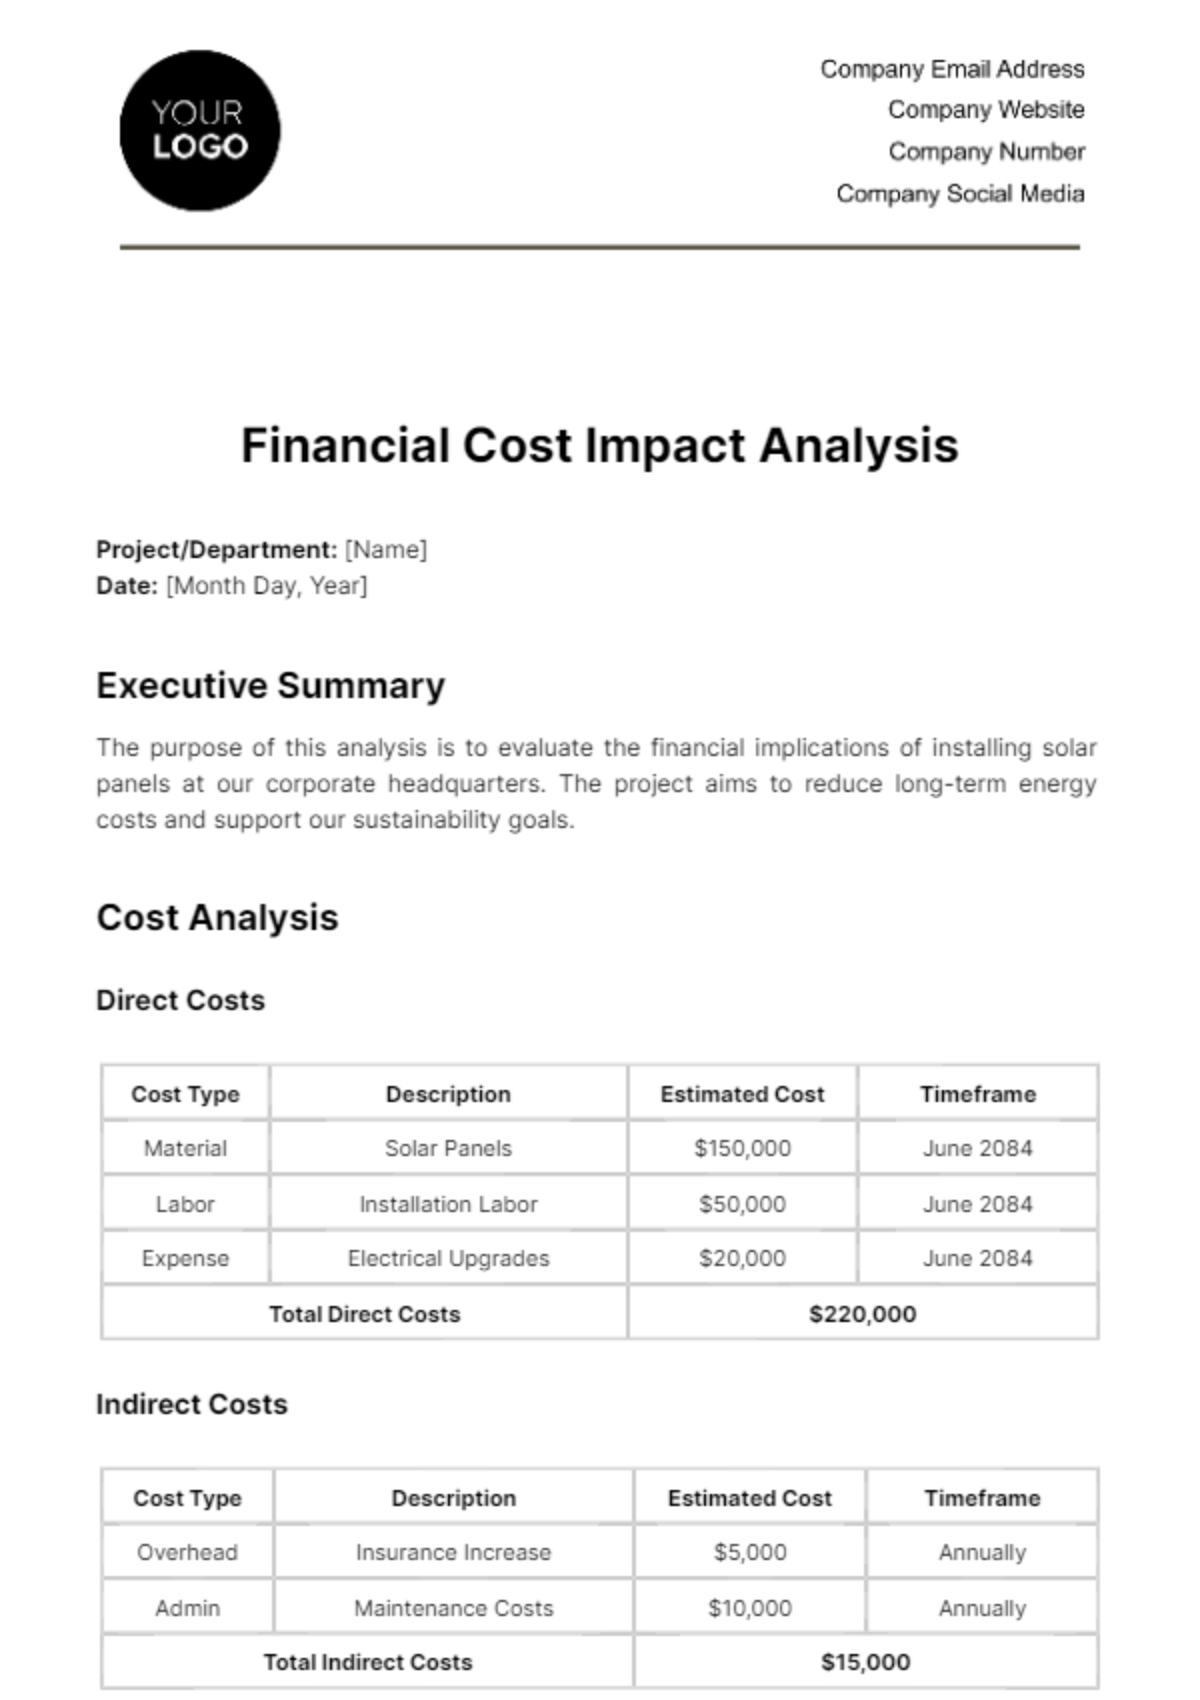 Financial Cost Impact Analysis Template